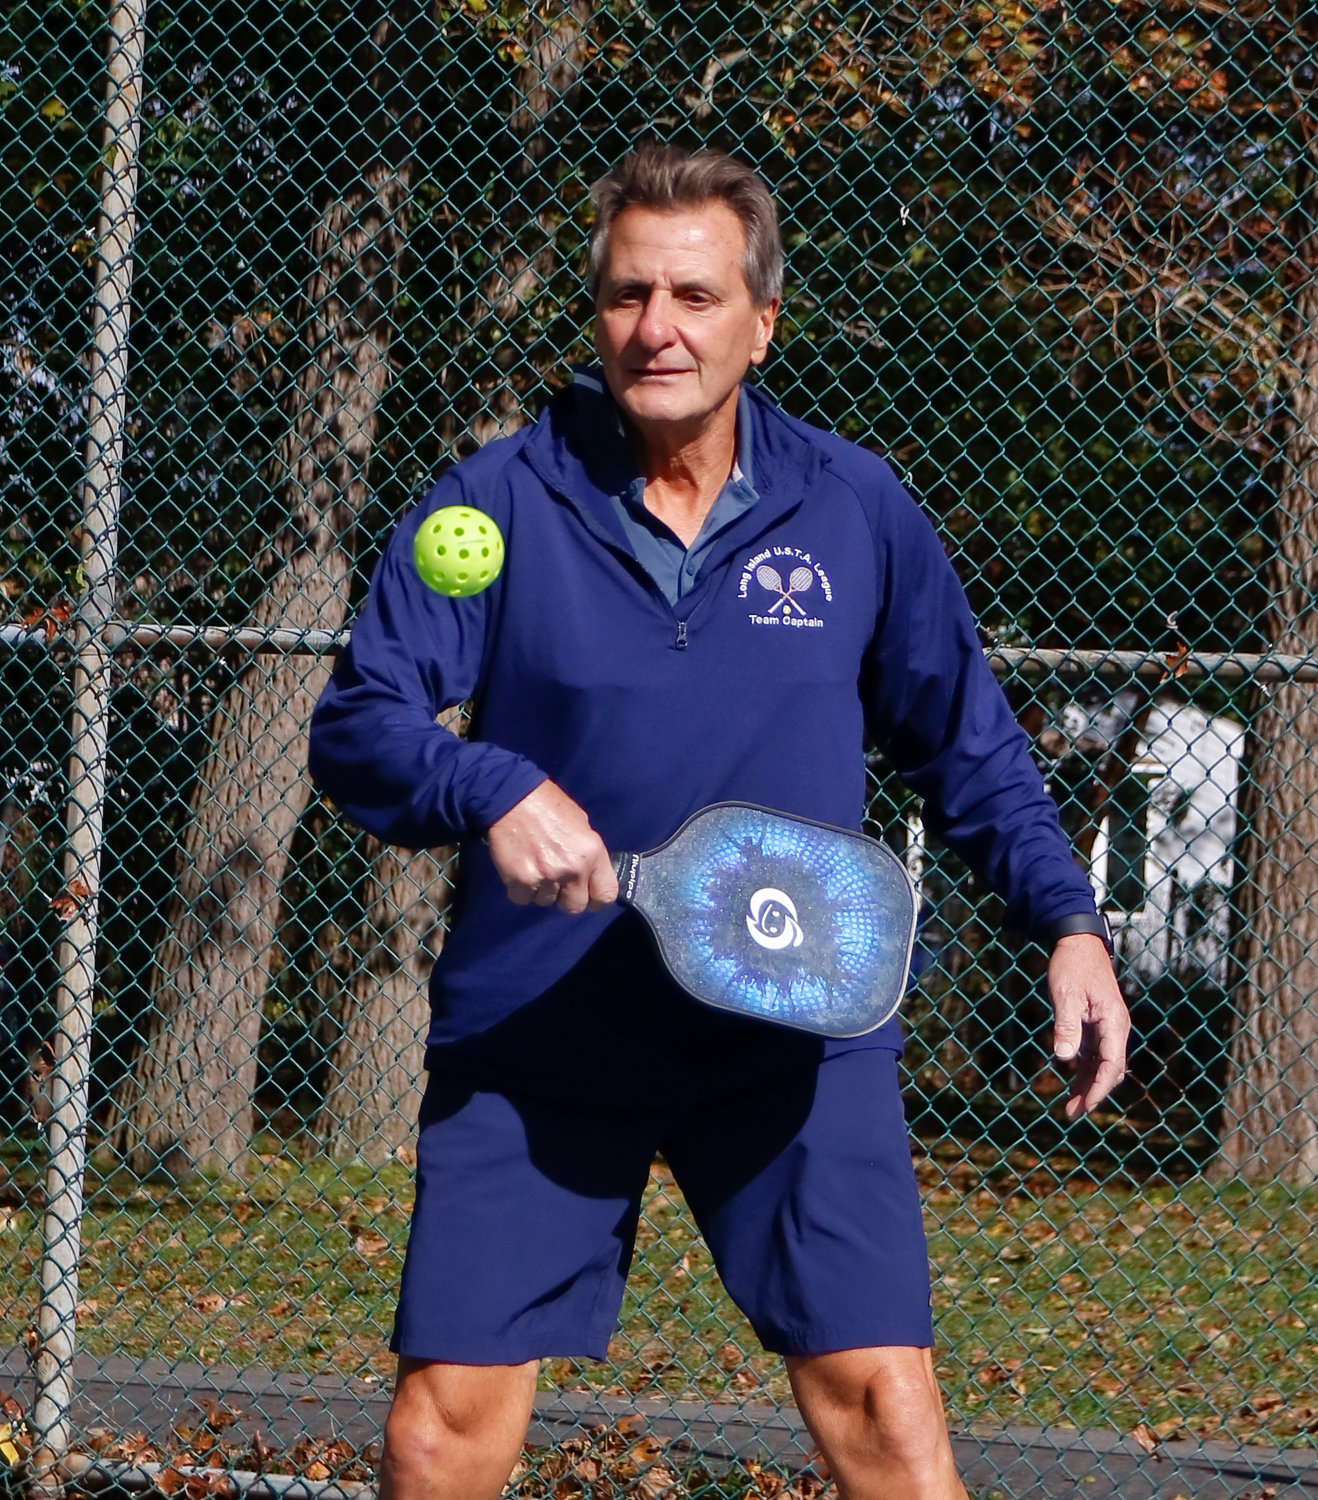 RVC considering pickleball courts Herald Community Newspapers www